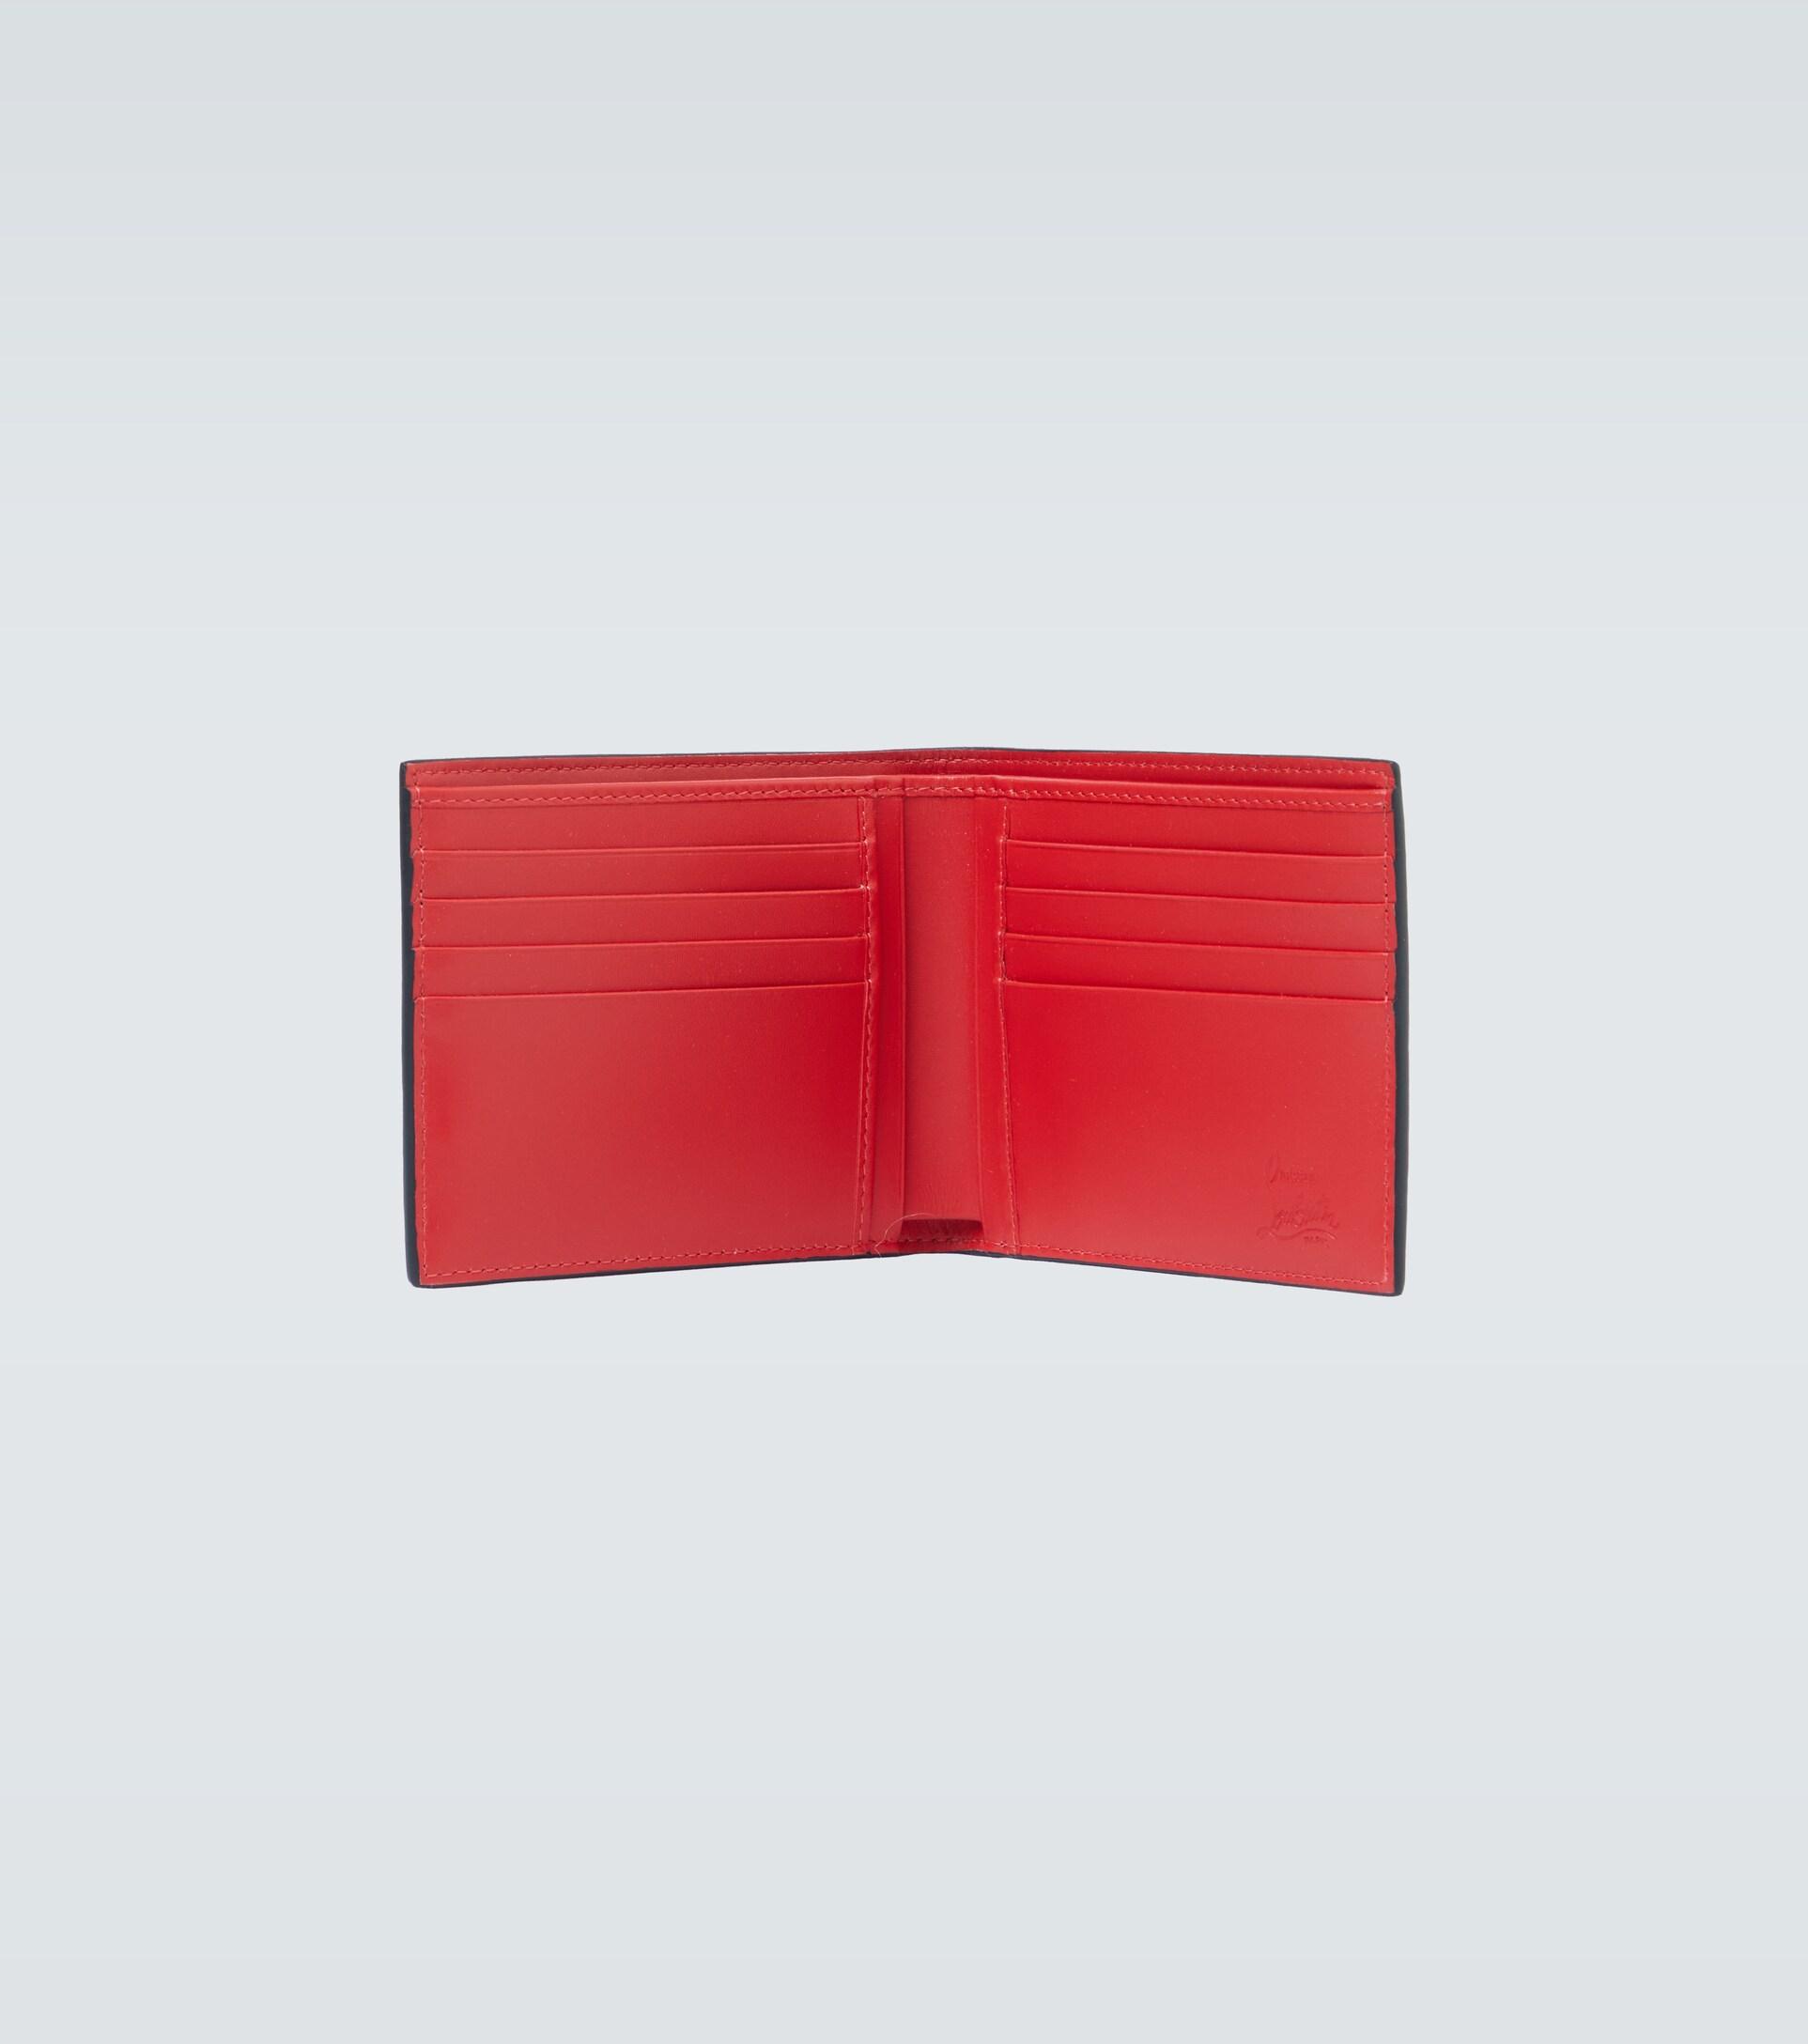 Christian Louboutin Coolcard Leather Wallet in Red Black (Red) for 